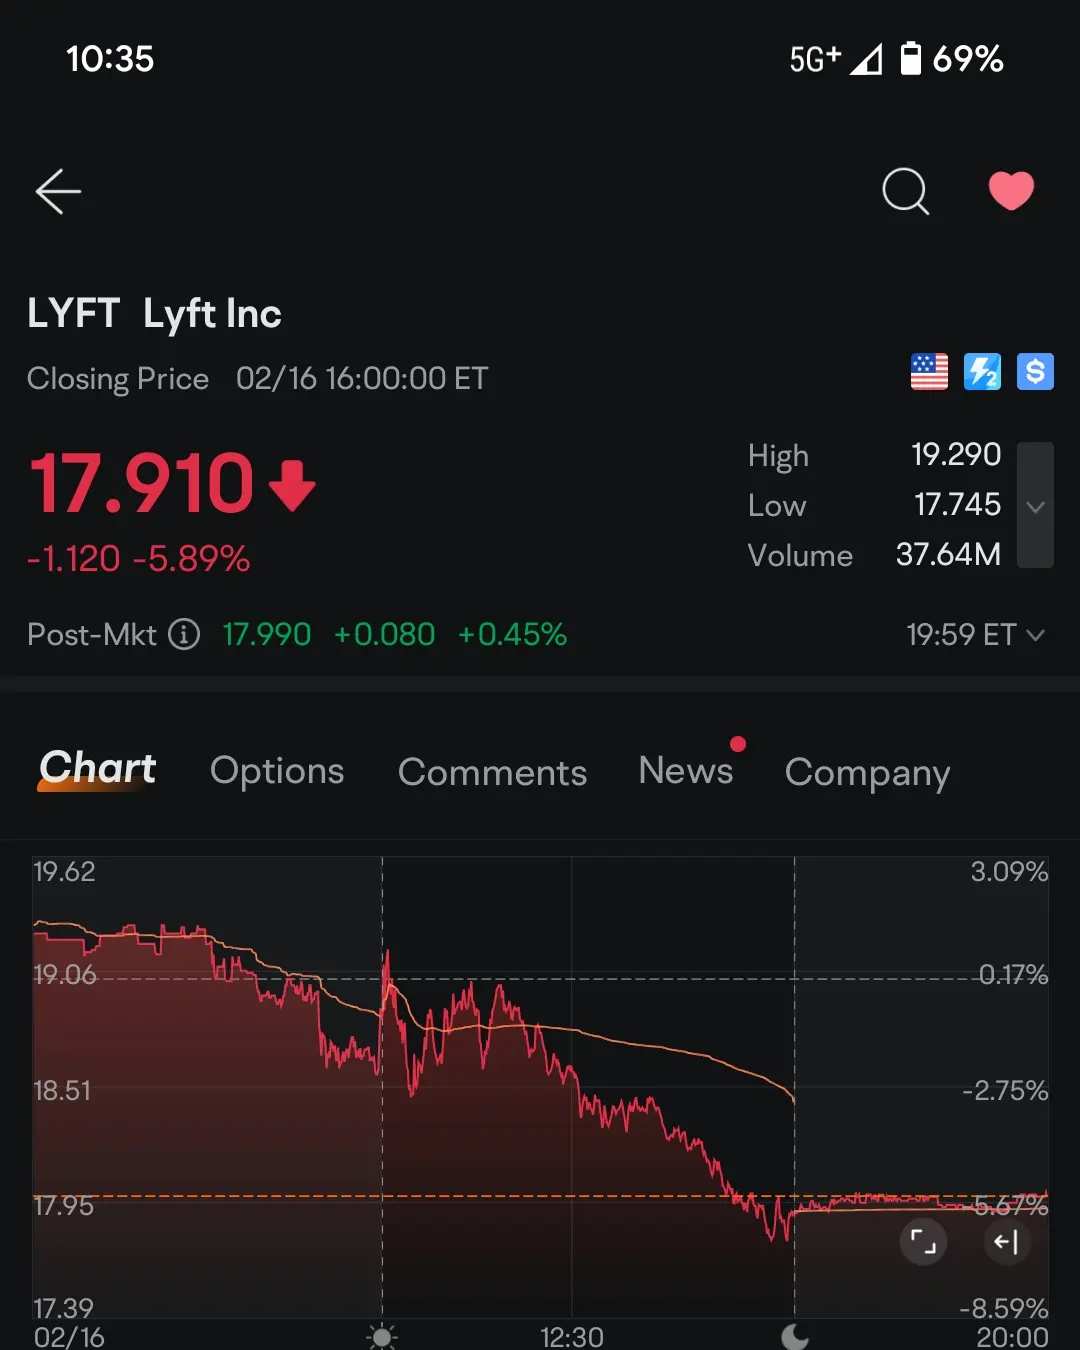 yesterday Lyft was over 18 but today its 17.910 can someone explain?